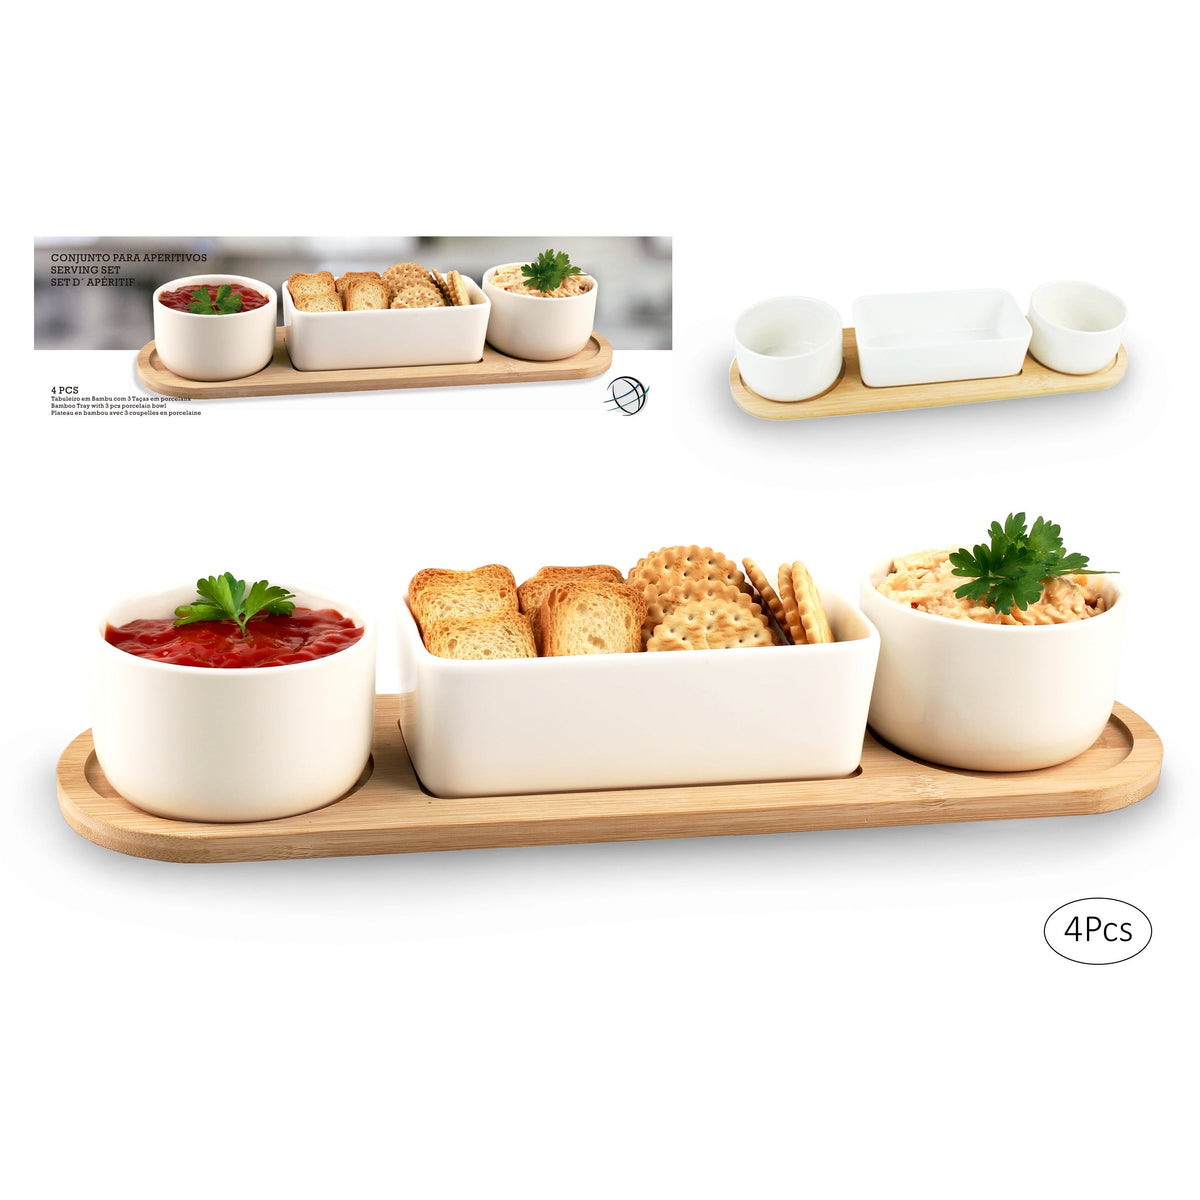 Set of 3 Appetizers Serving Dishes with Tray